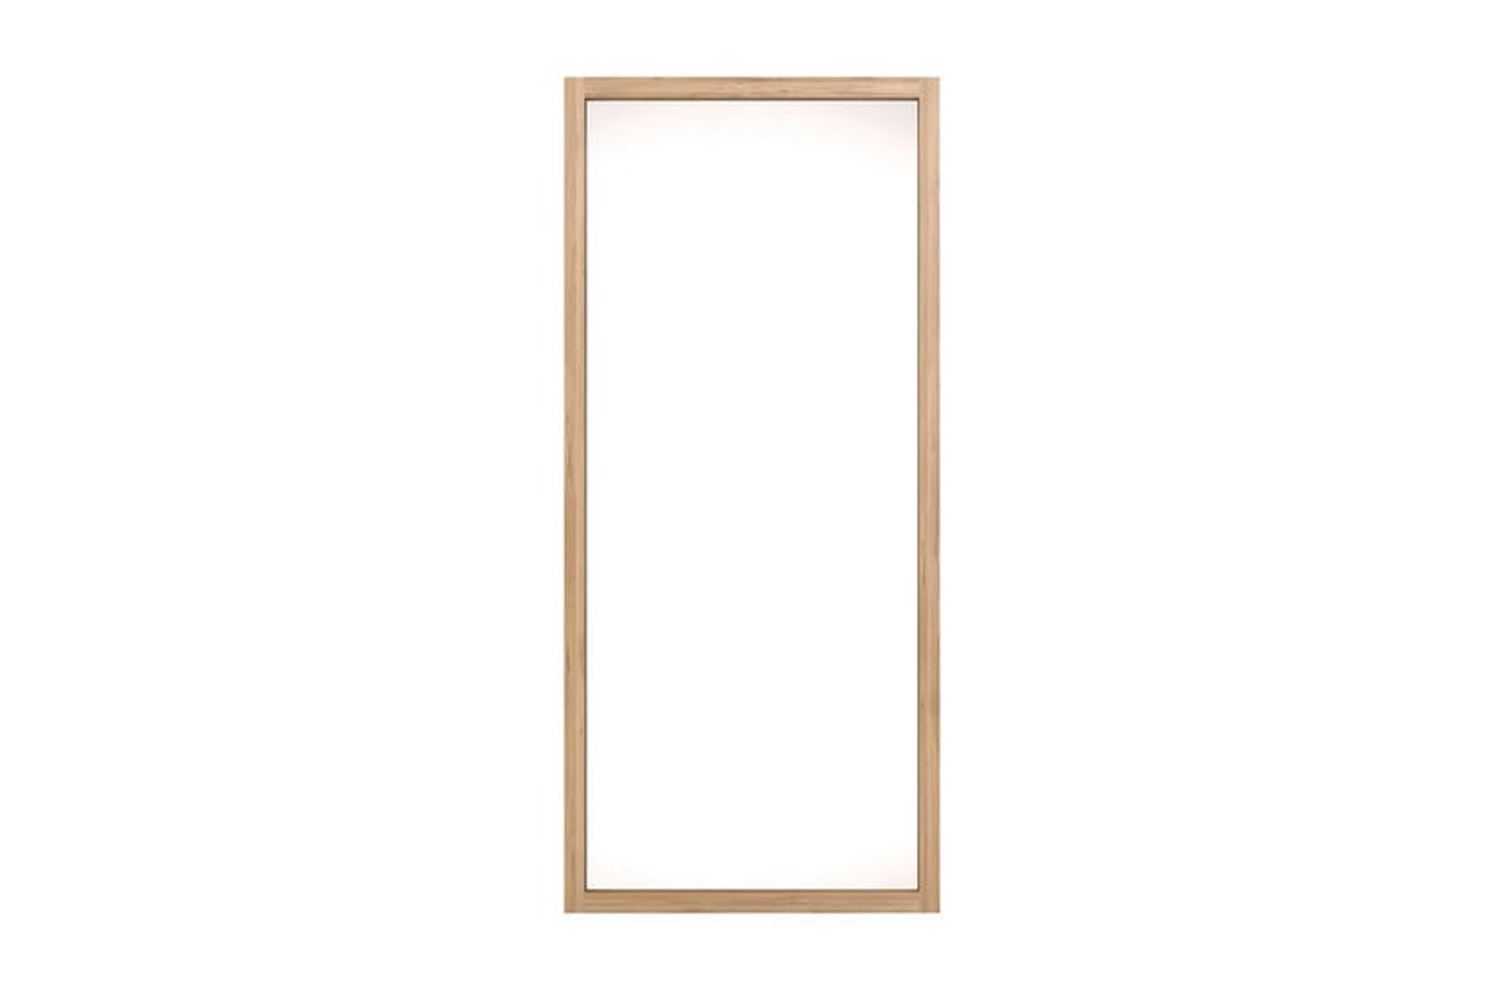 the ethnicraft light frame mirror is \$705 at lekker home. 10